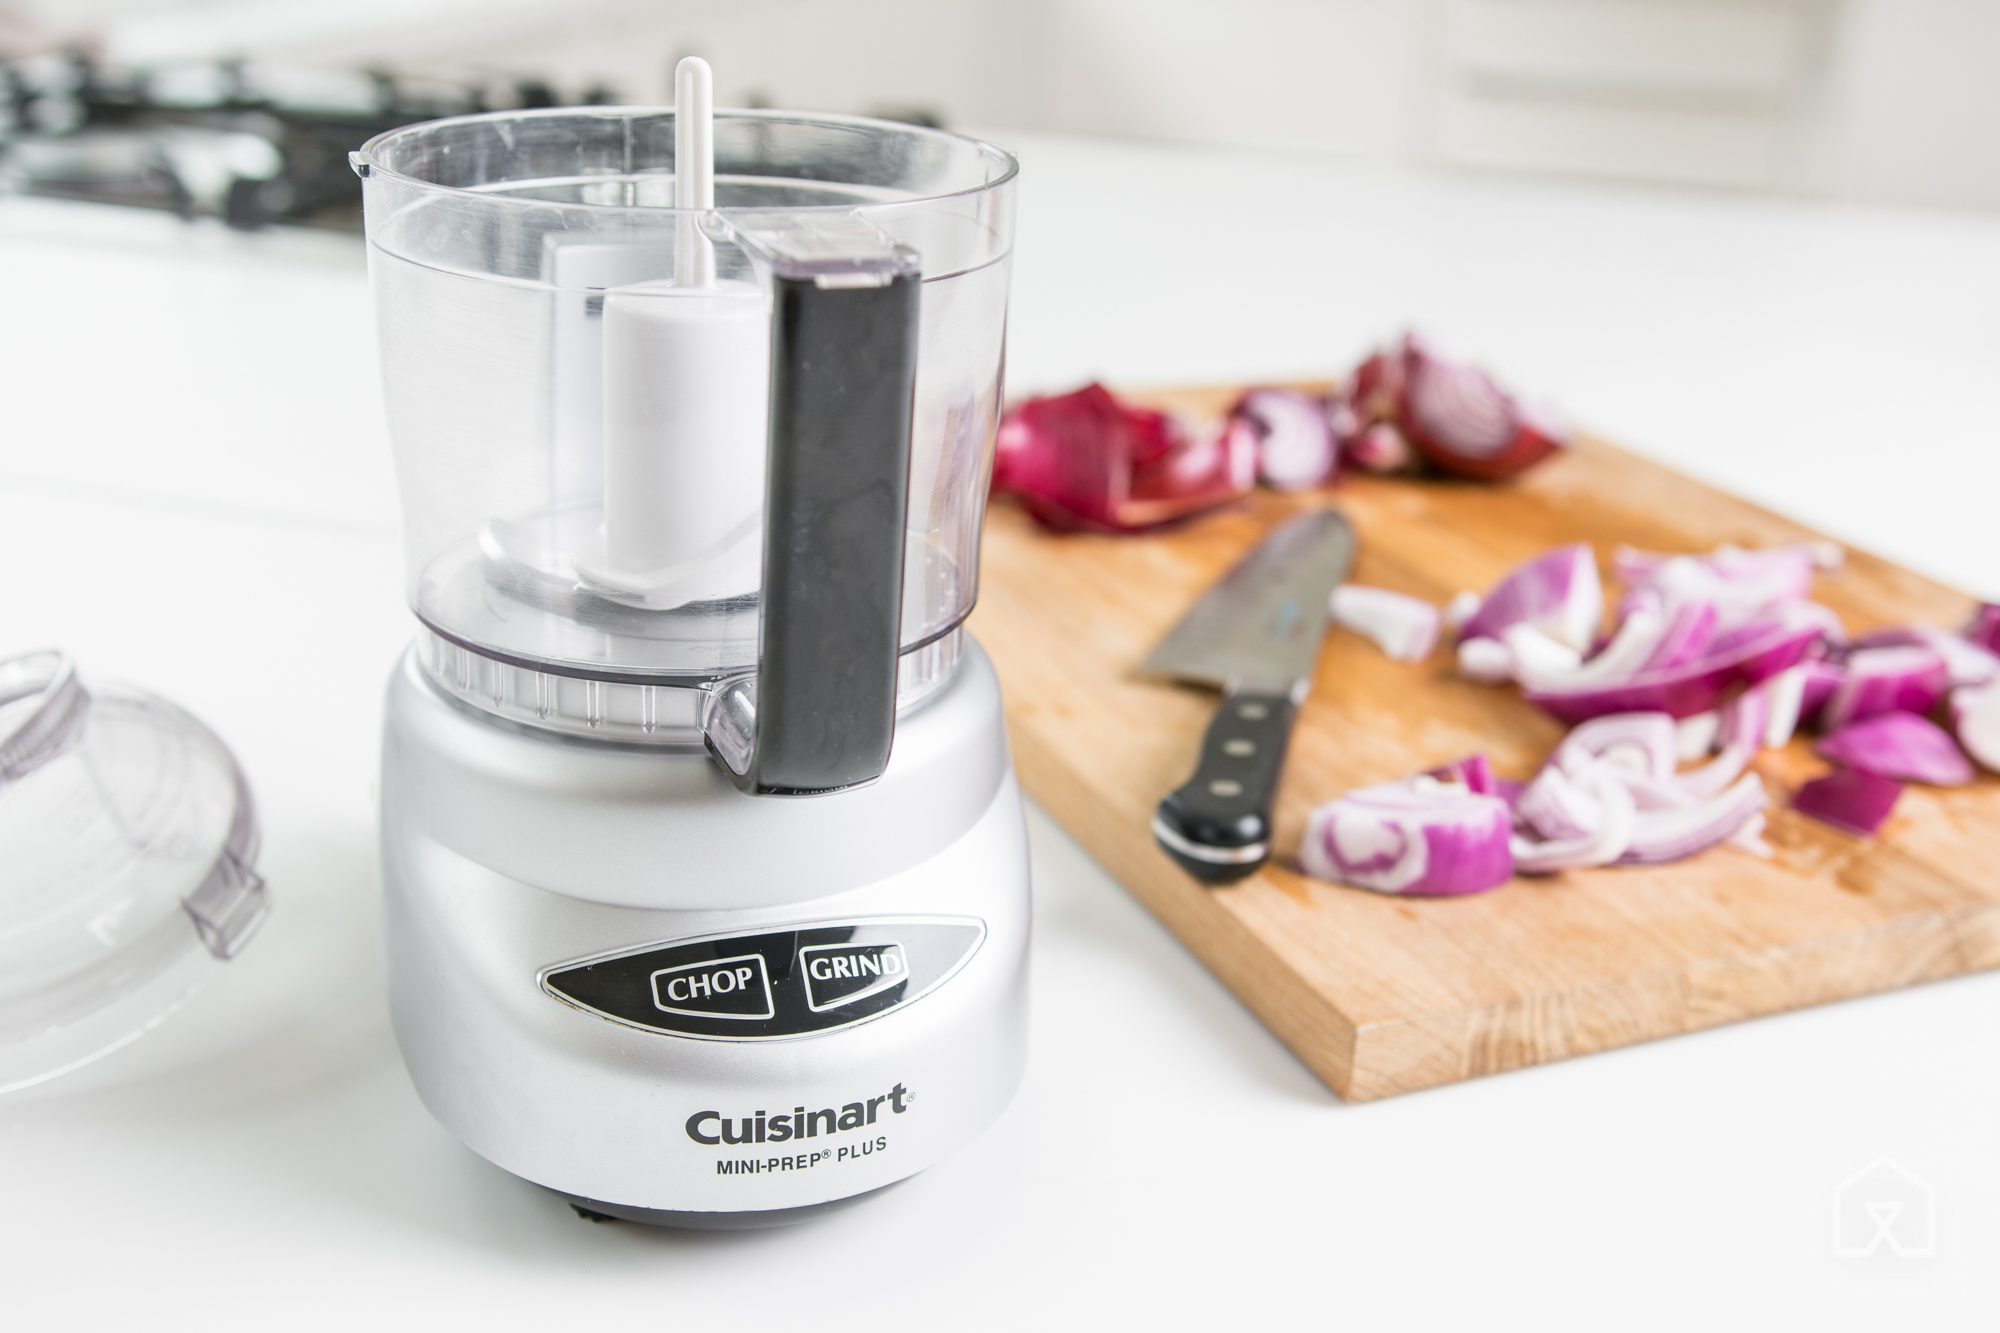 The best food processor